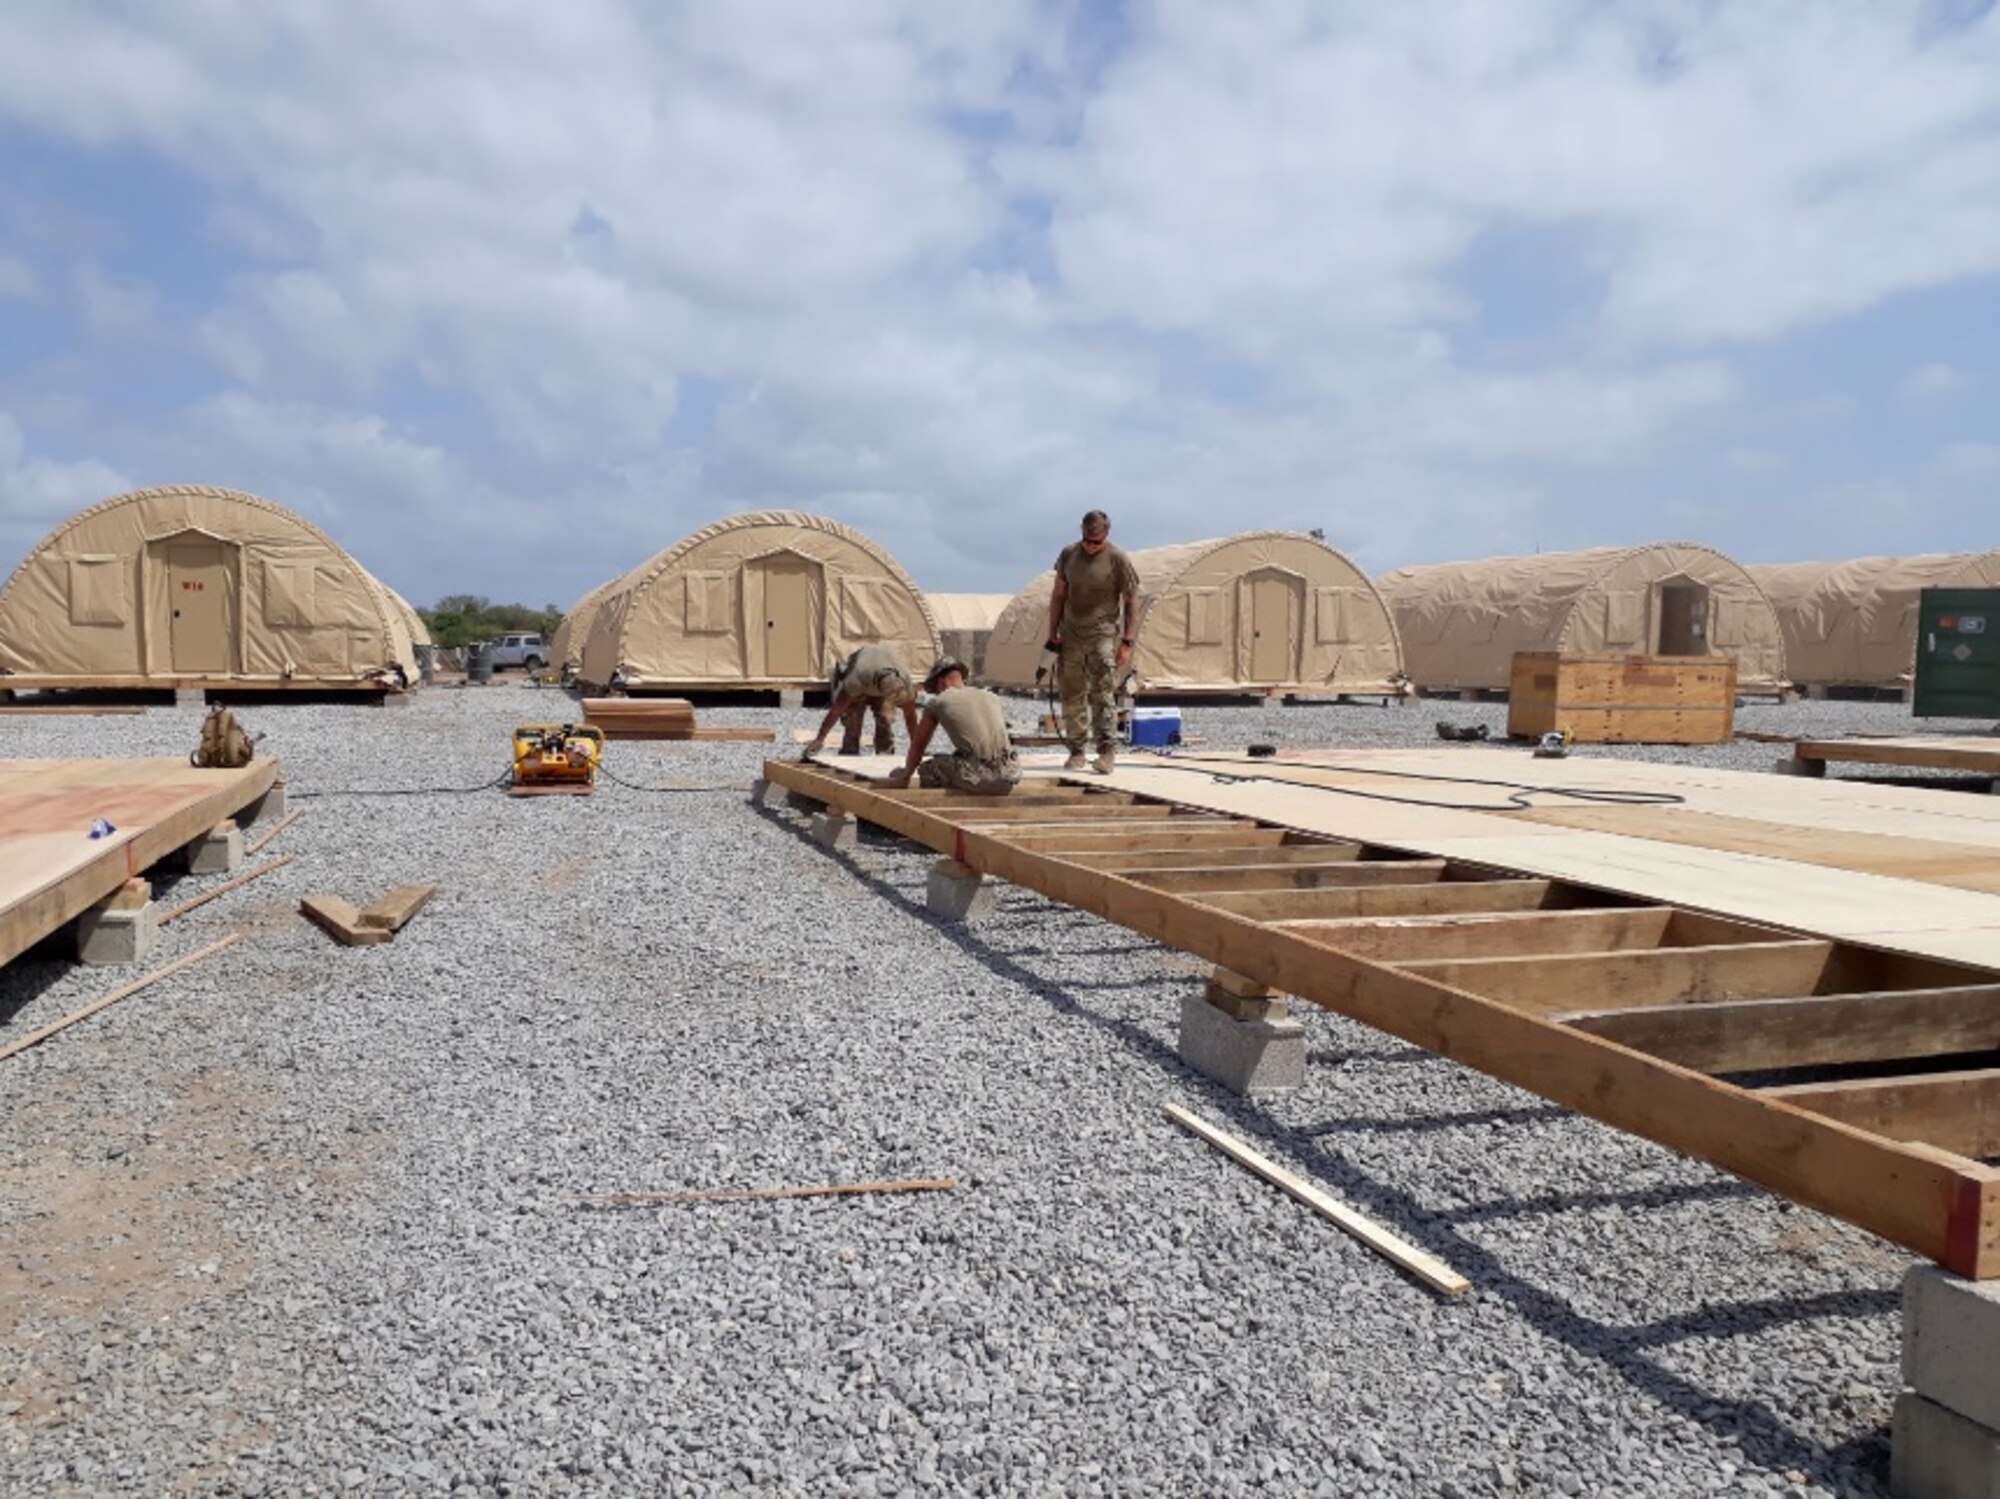 Airmen from the 435th Air Ground Operations Wing and 435th Air Expeditionary Wing execute a short-notice tasker to build-out a base capability in East Africa, Dec. 29, 2020. In addition to the build-out the Airmen repurposed three sleeping buildings into office spaces, expanded kitchen operations by 1,000 square feet, and constructed new fire department berthing tents and an alarm room. (Courtesy photo)